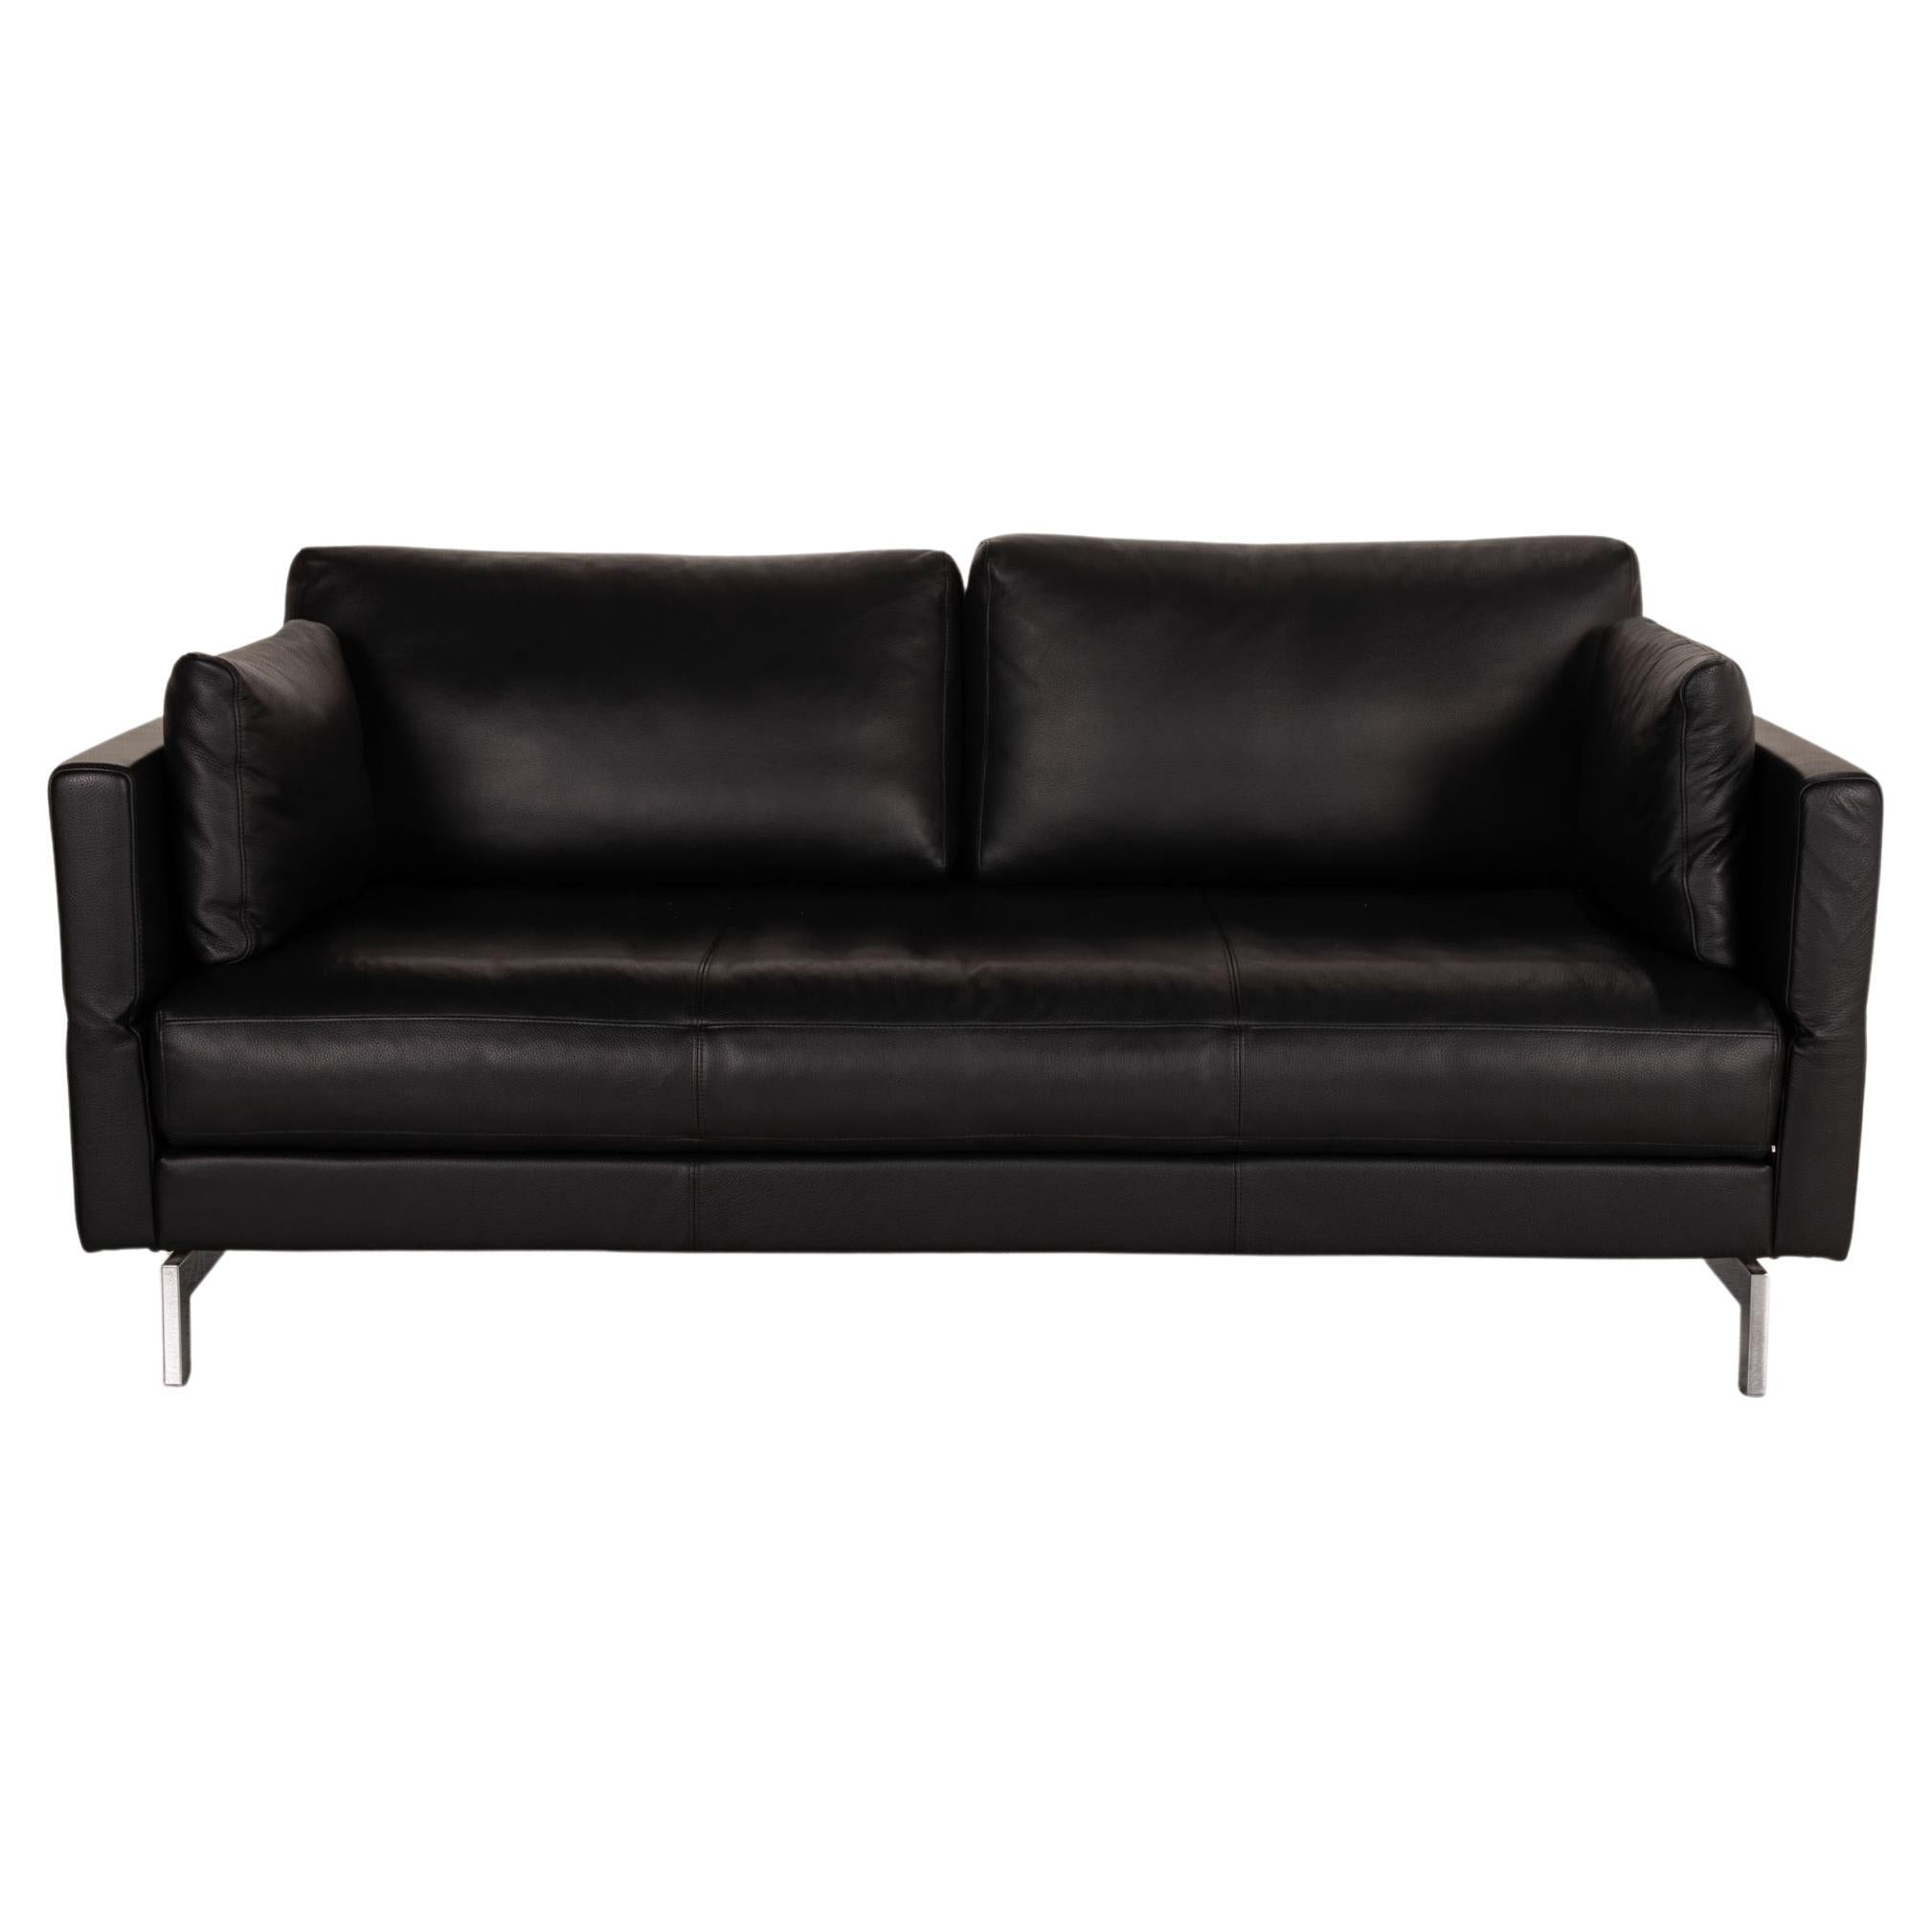 Rolf Benz Vida Leather Sofa Black Three-Seater Couch Function For Sale